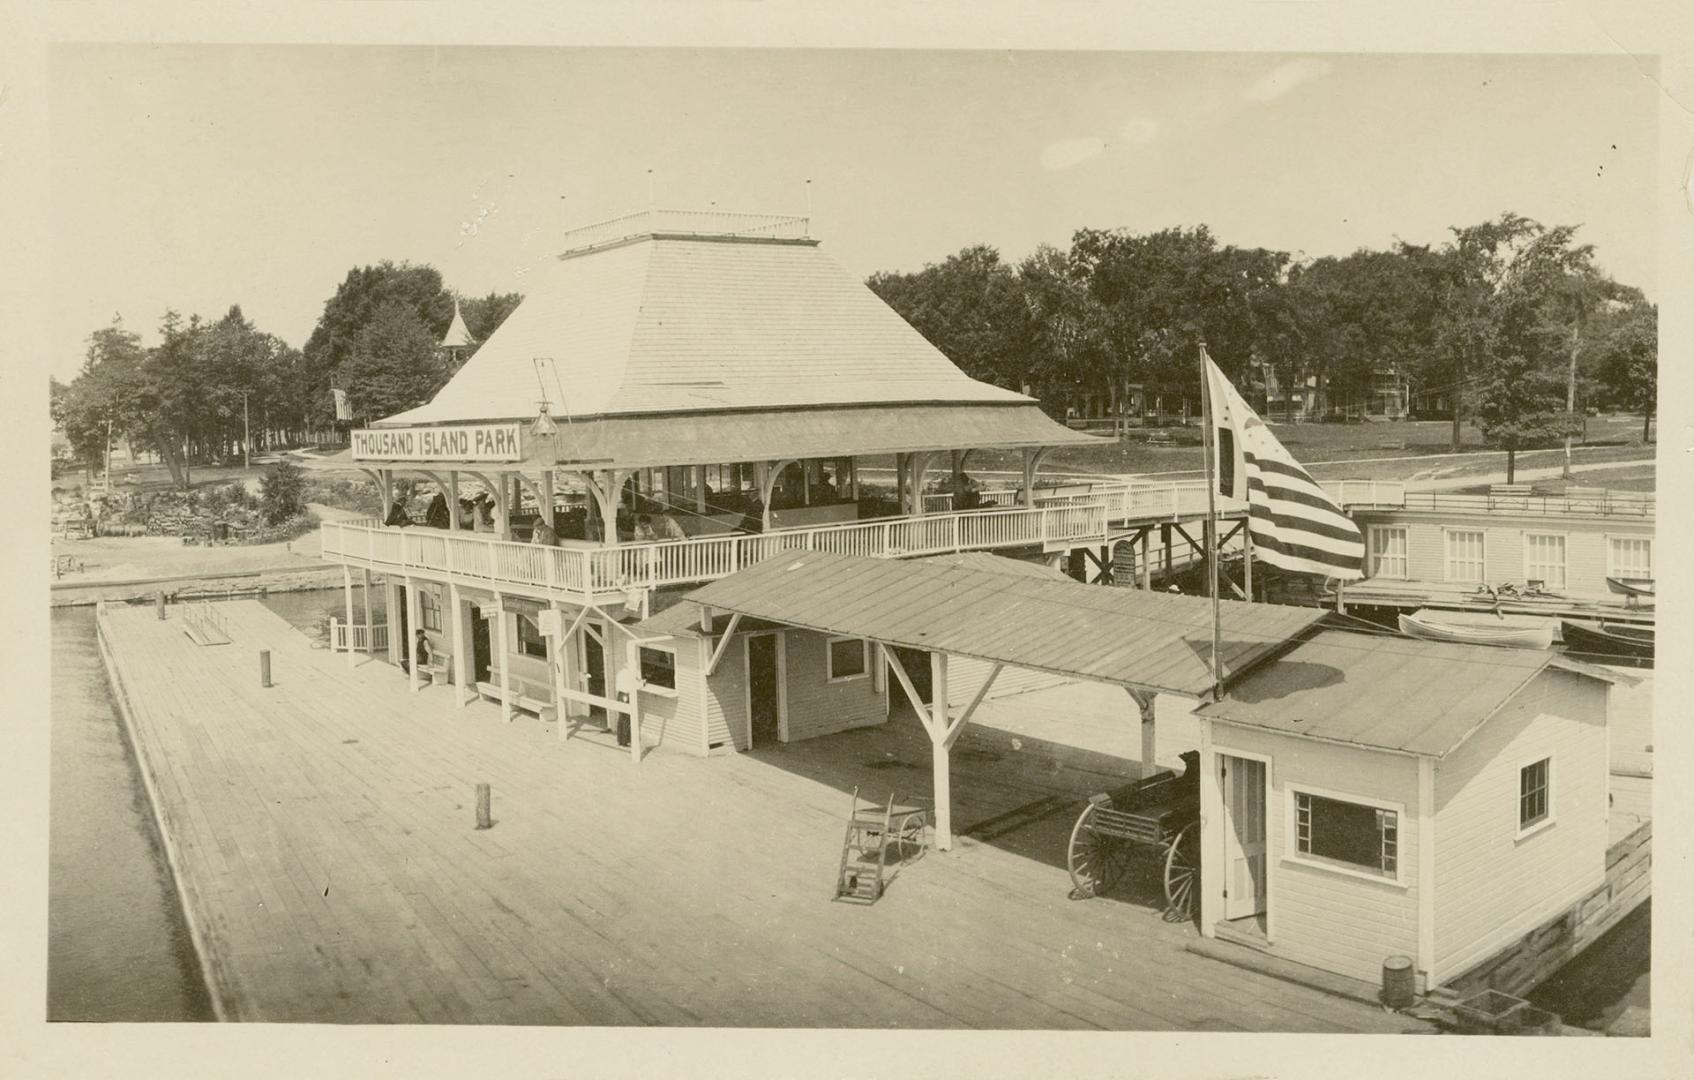 Black and white photograph of a two story covered structure beside a large dock in a river.